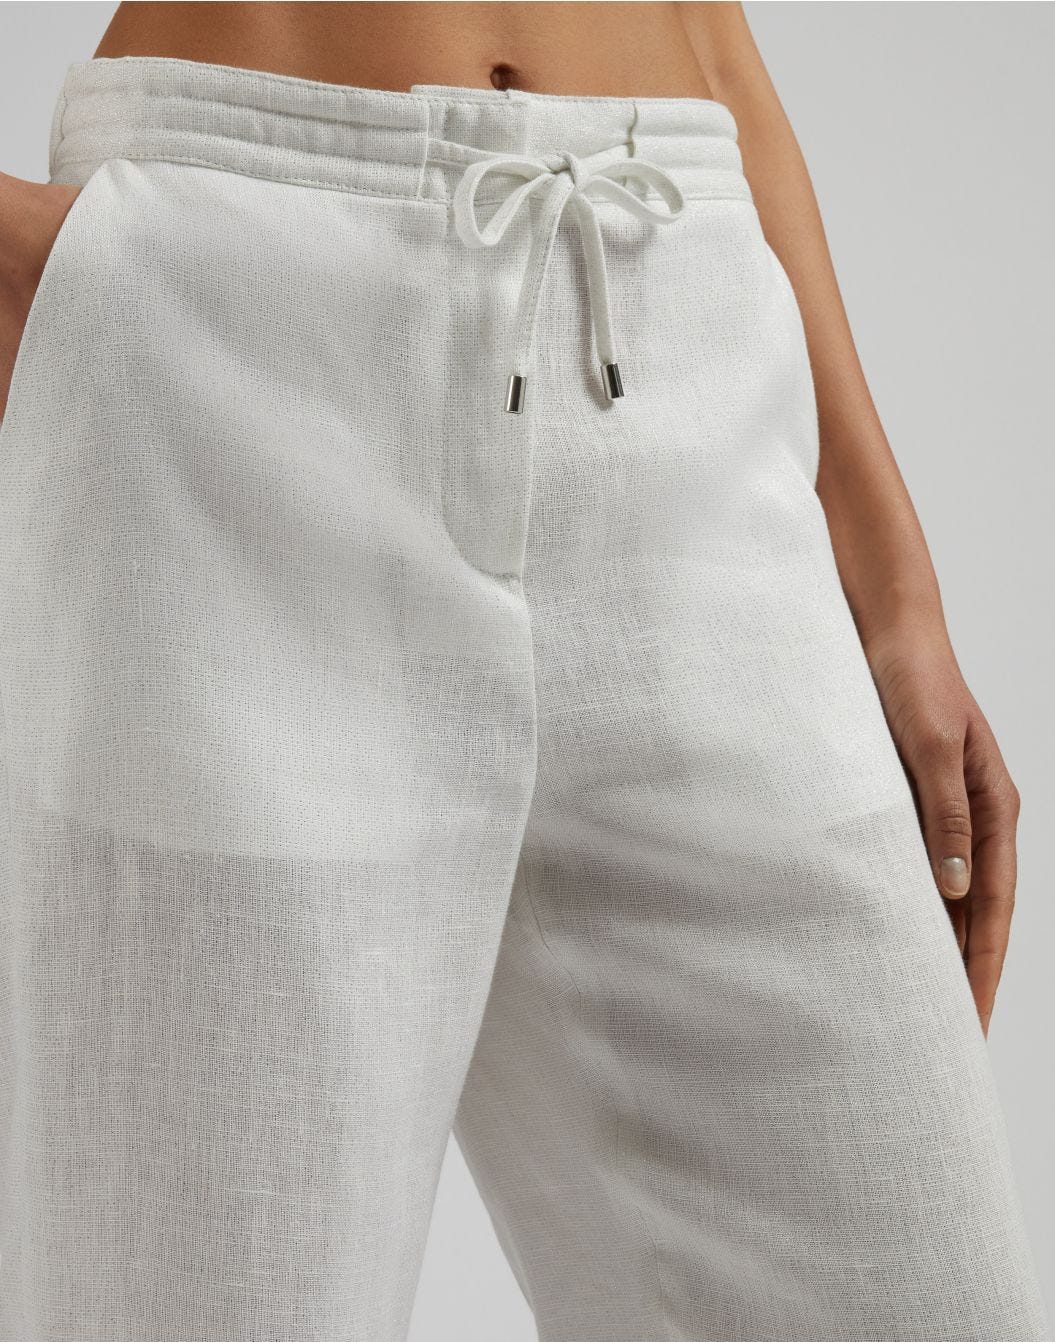 Lurex linen cloth loose-fitting trousers